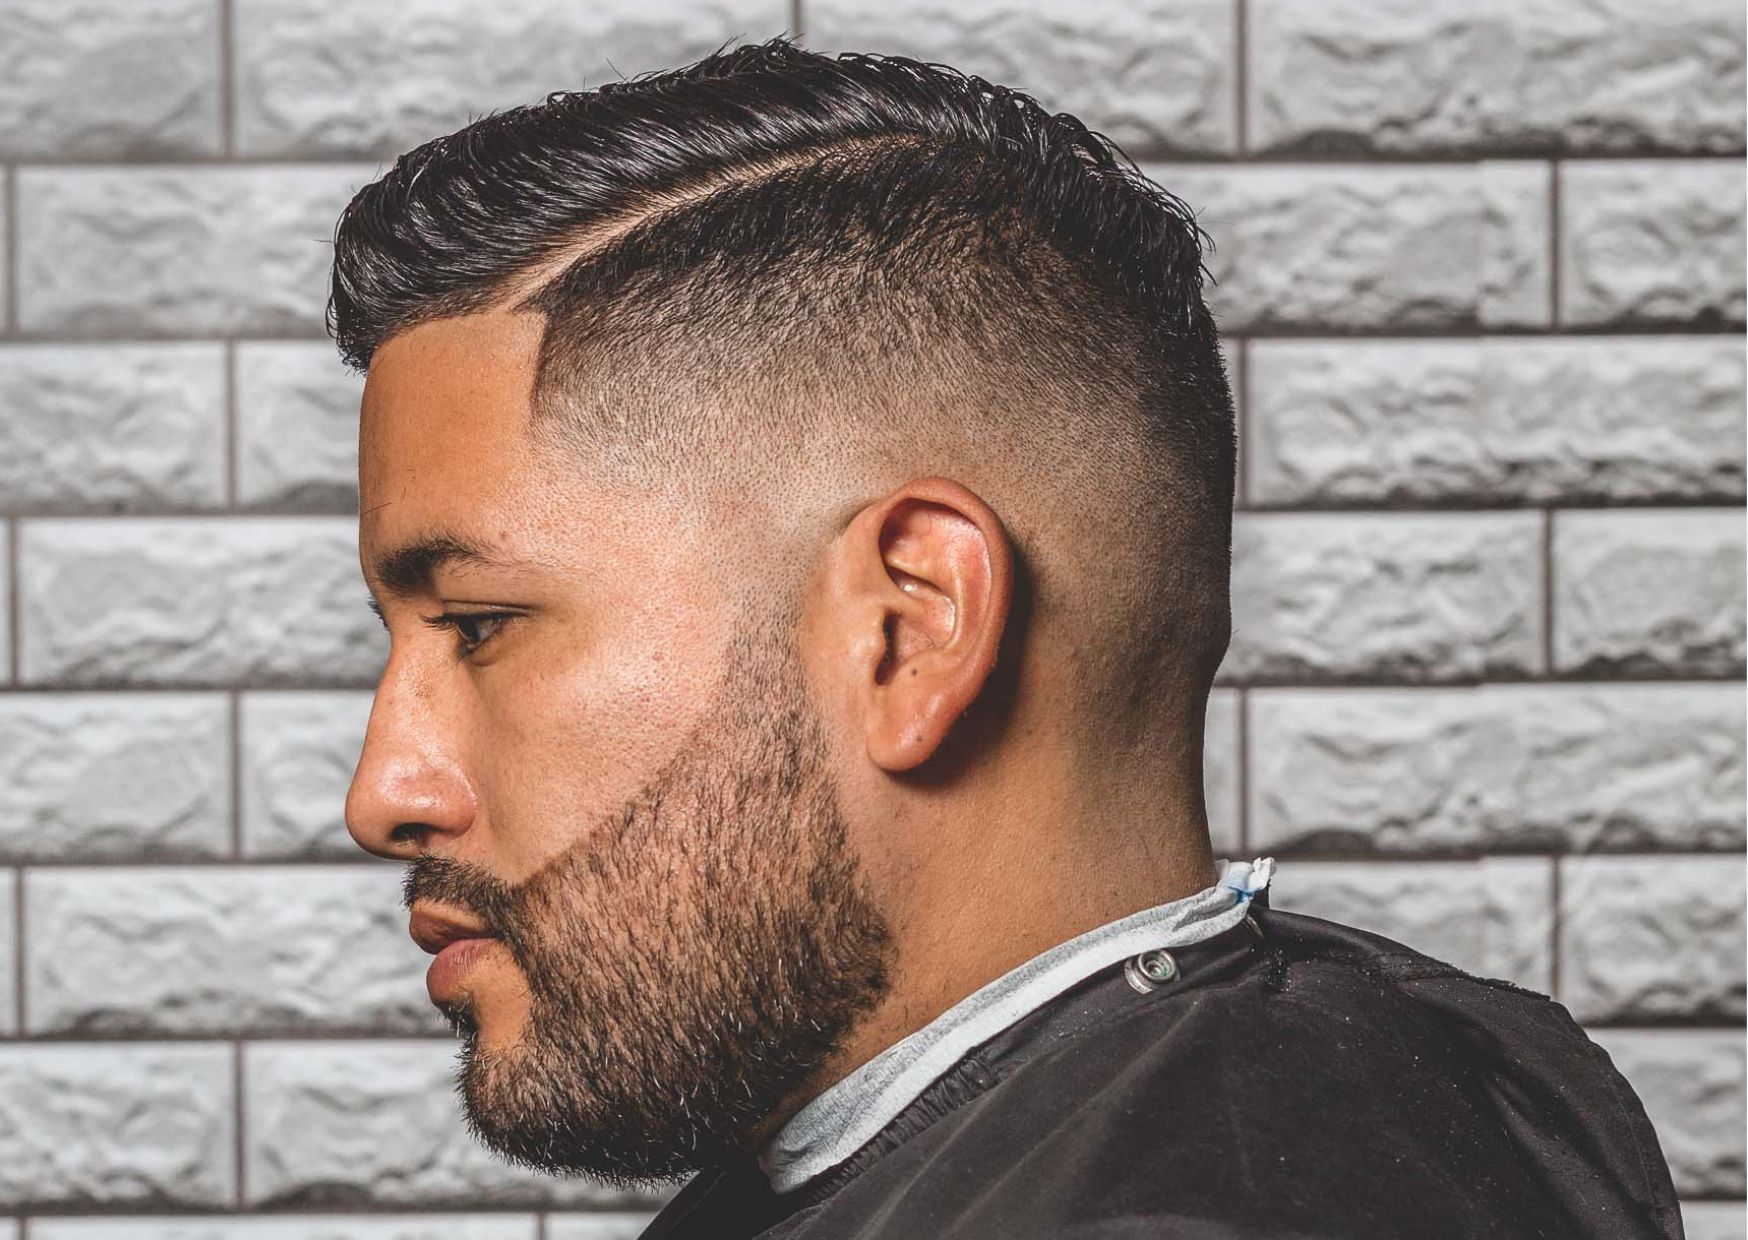 75 Trending Haircuts For Men To Try in 2023